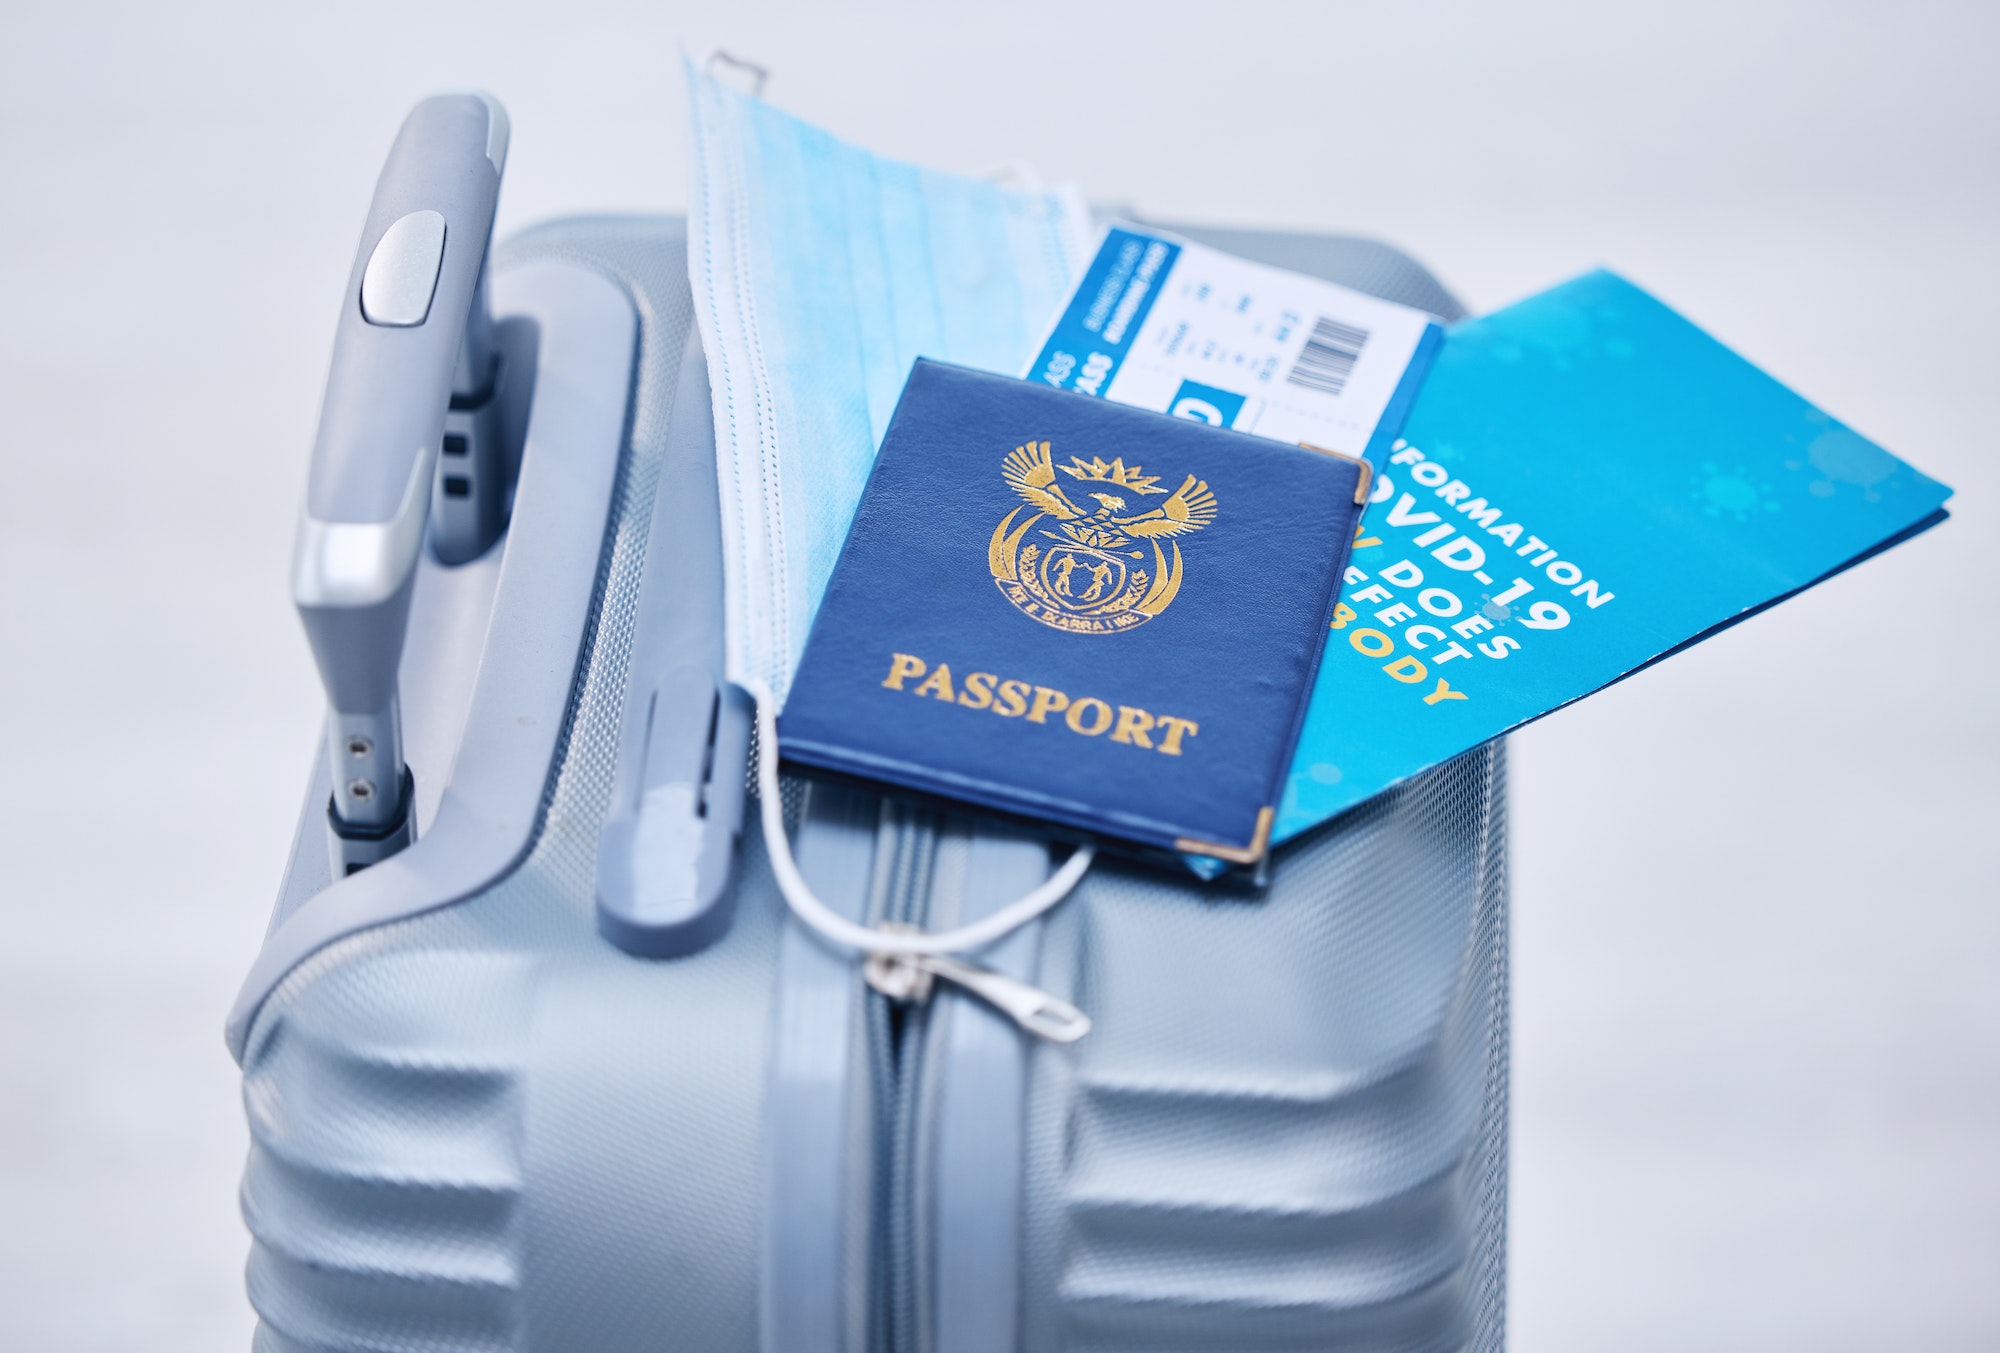 Covid, passport and suitcase for travel compliance, policy and documents in global, airport or visa